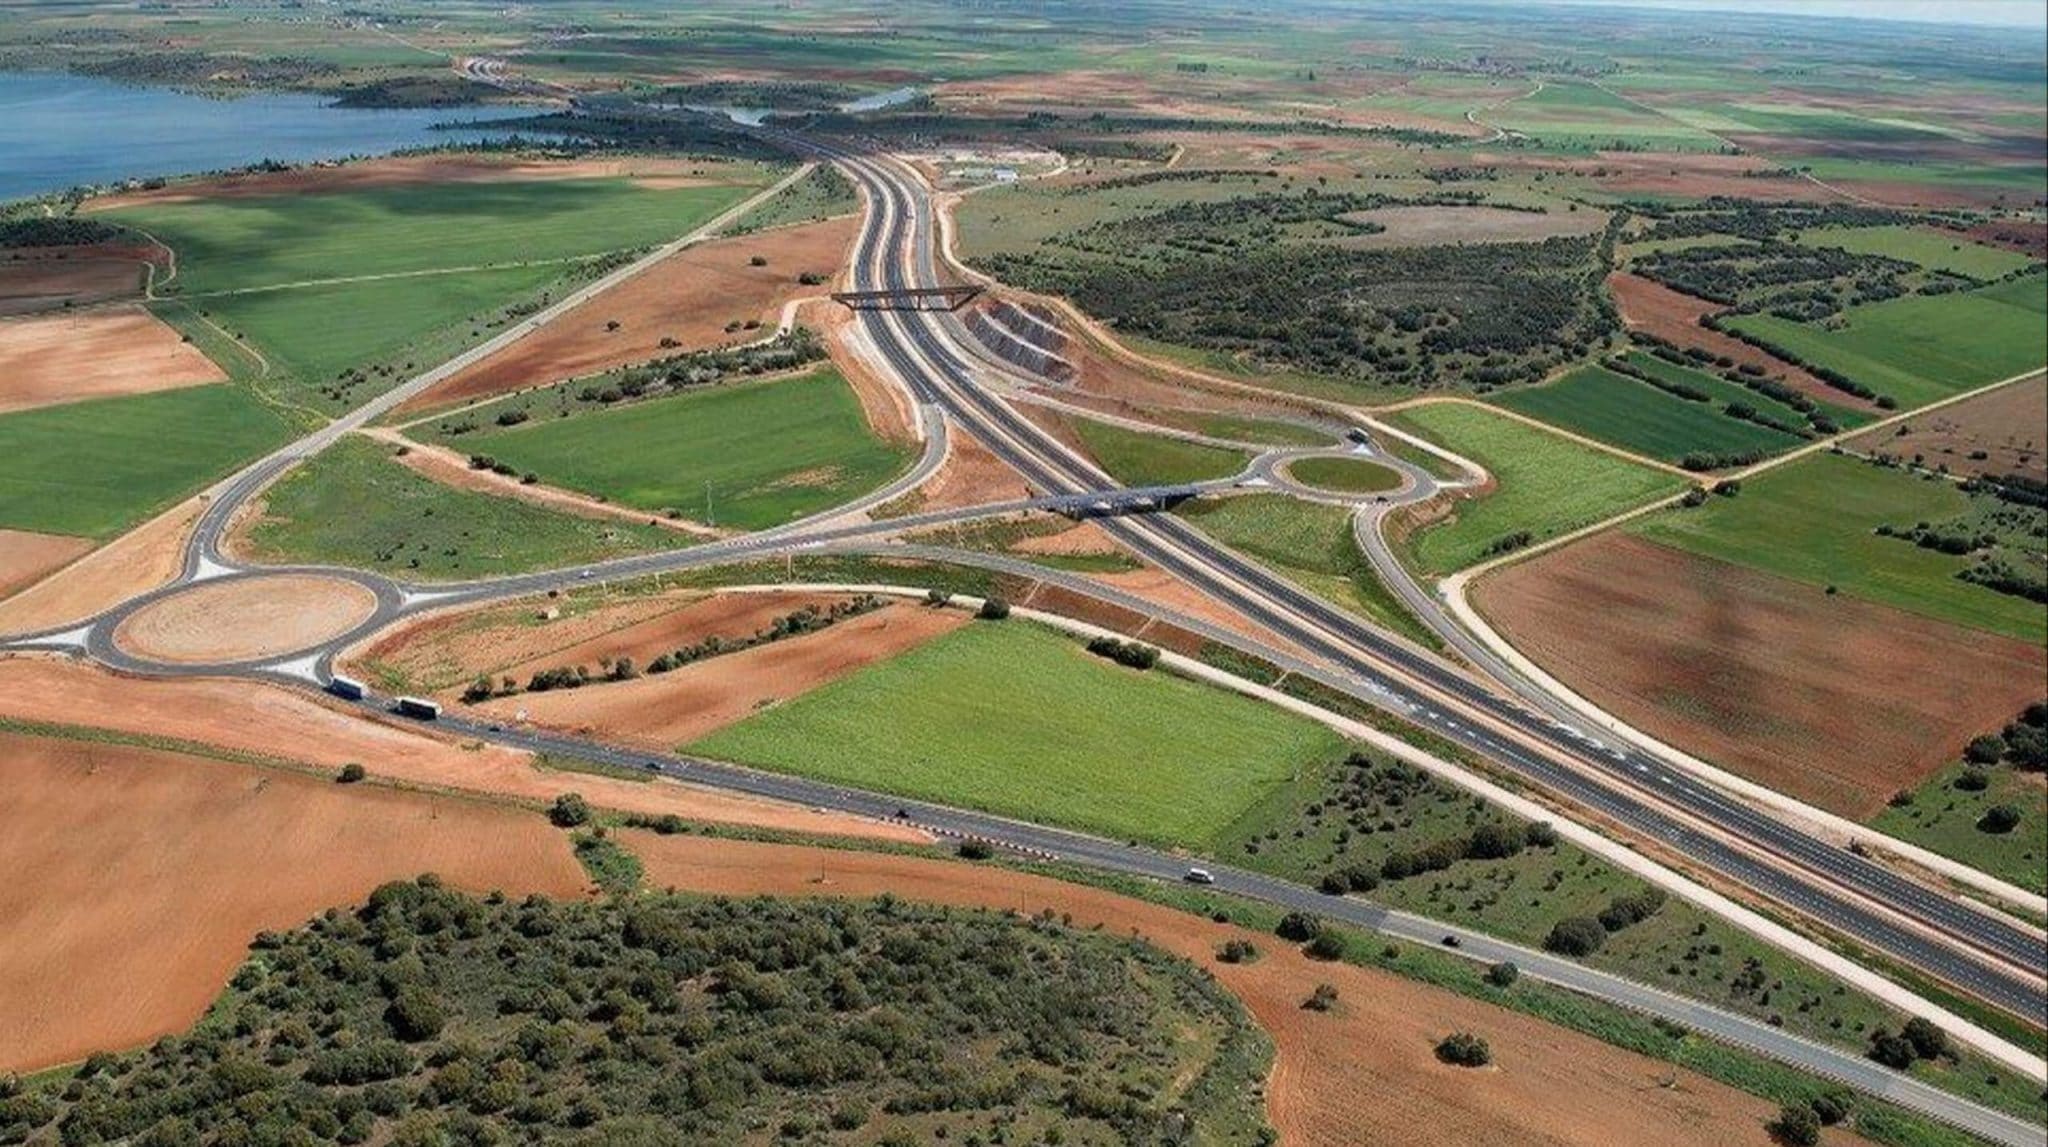 Aerial view of motorway intersecting countryside